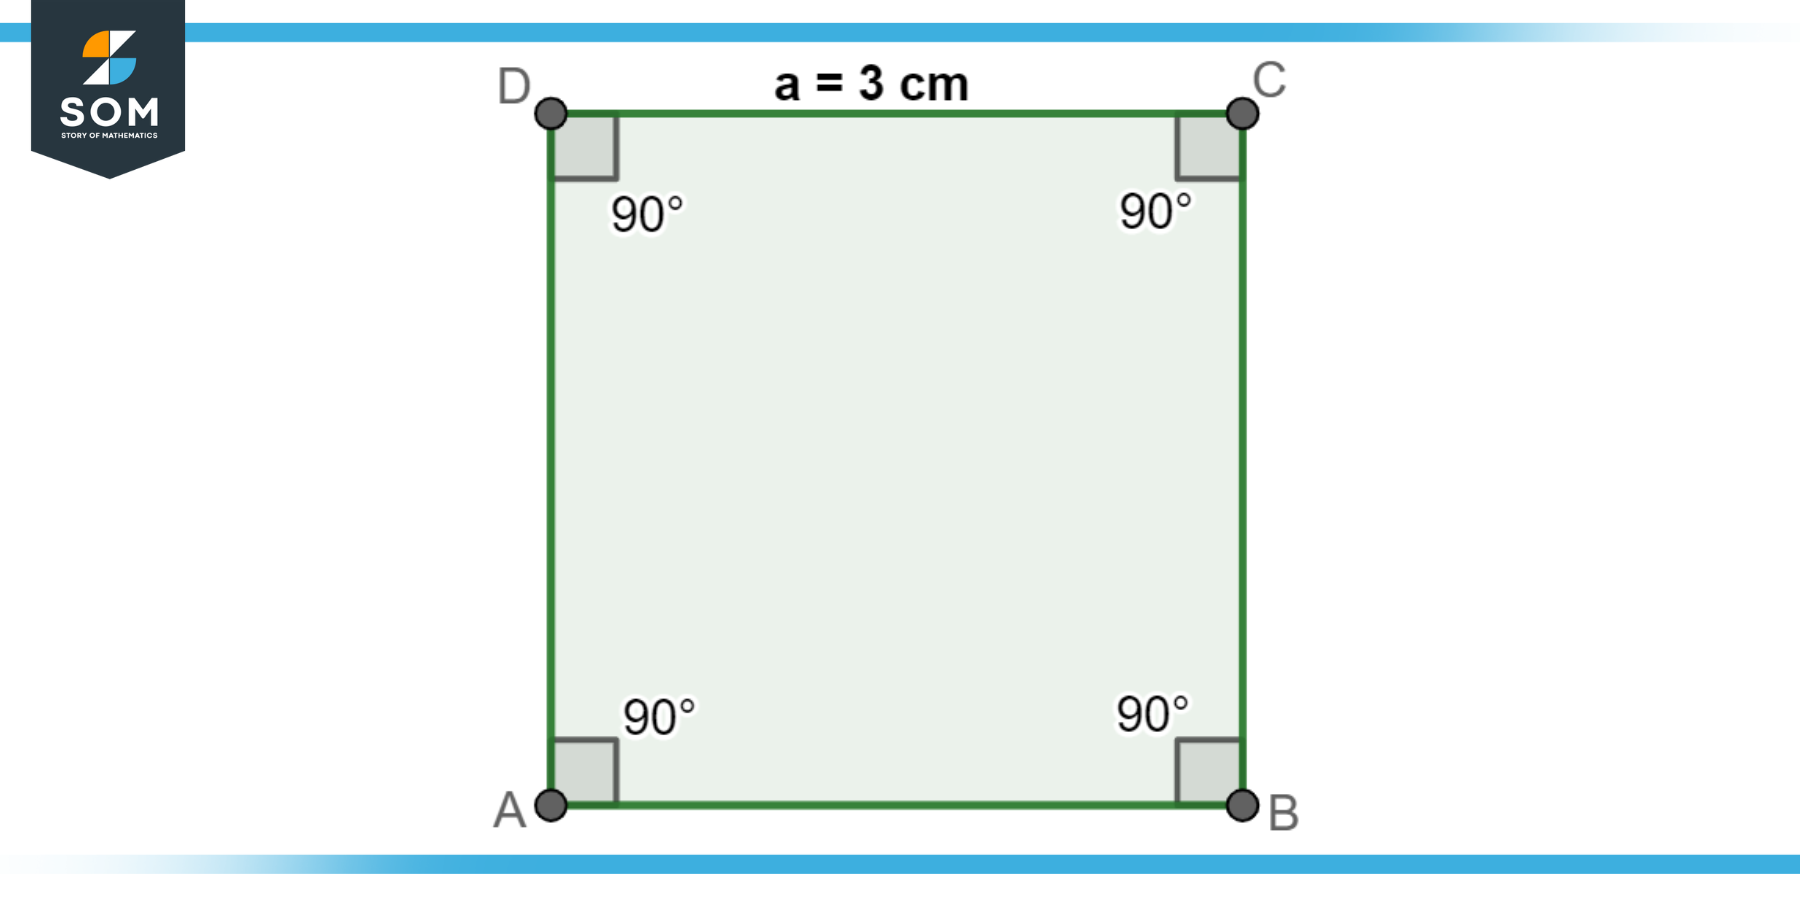 Quadrilateral Square ABCD each side 3cm